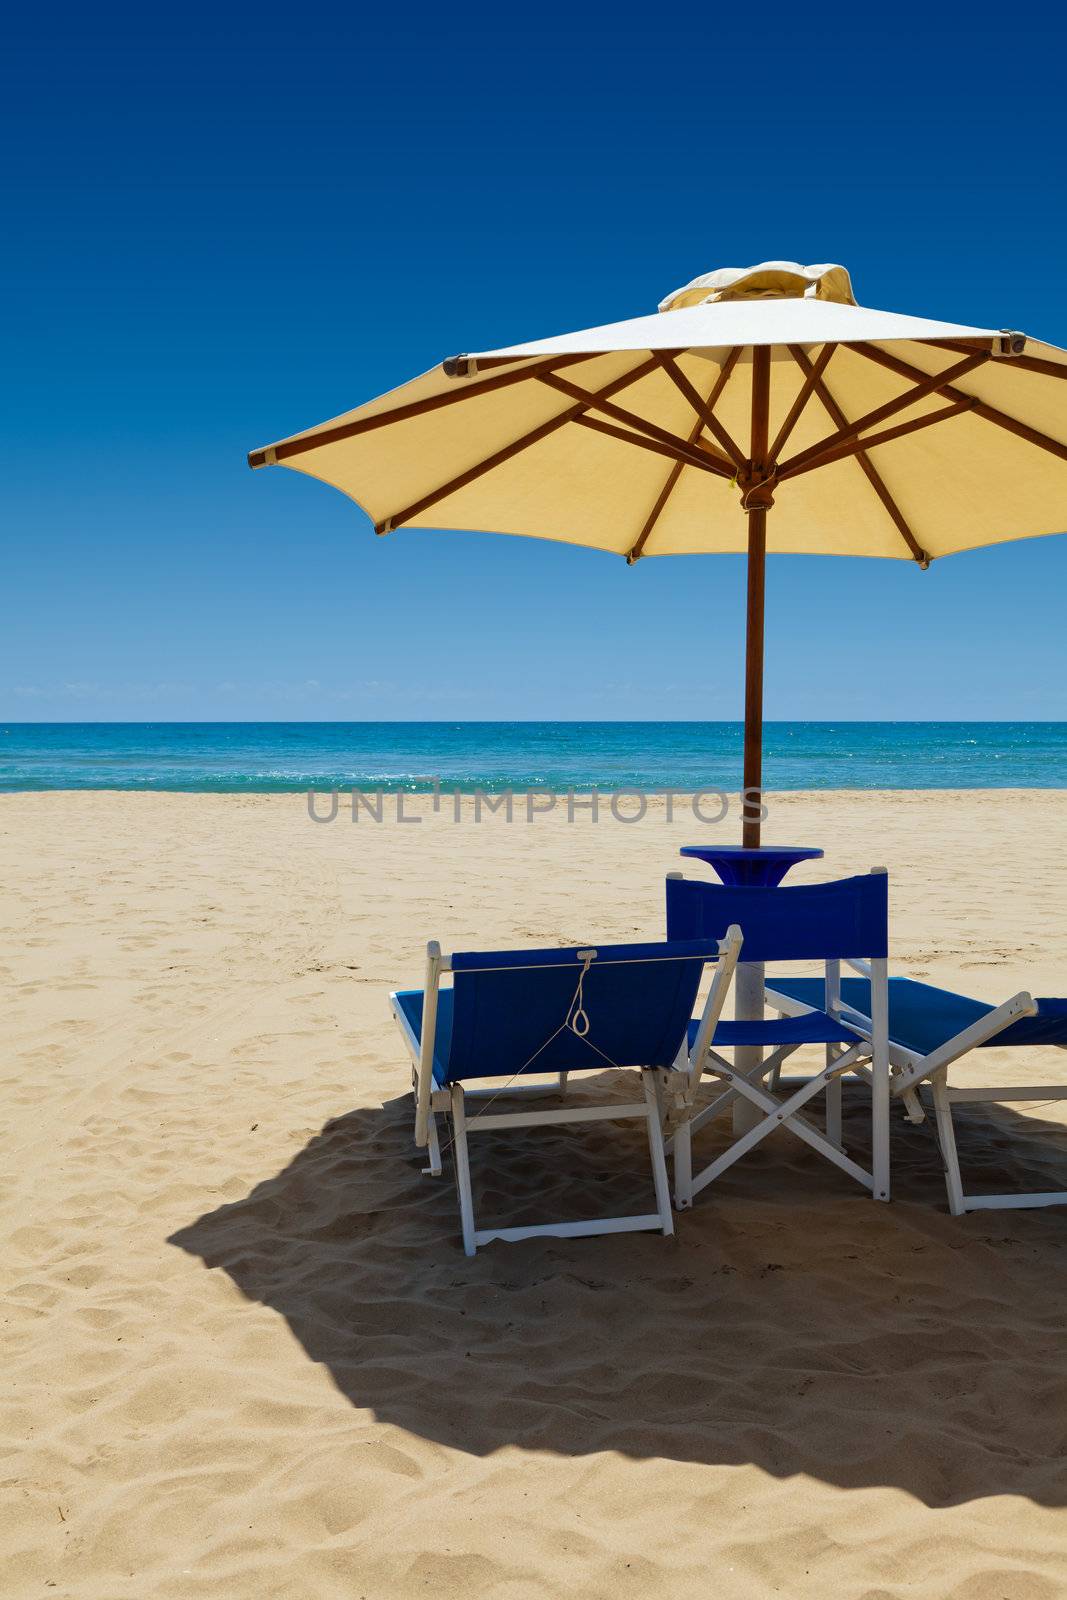 Deck chairs under an umbrella in the sand by Antartis